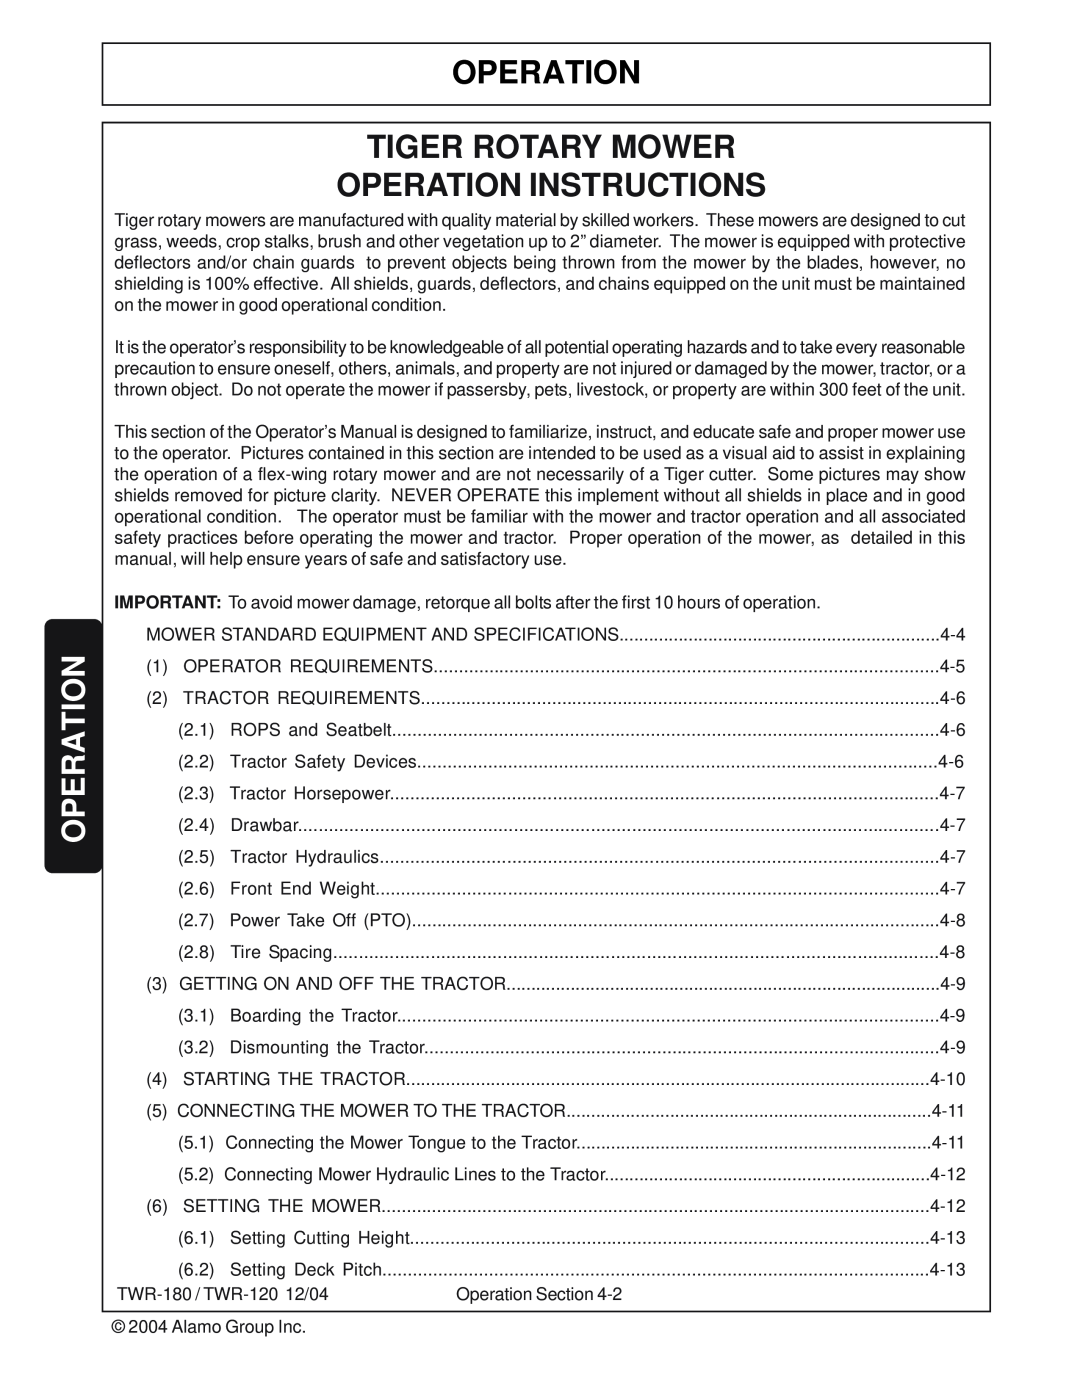 Tiger Products Co., Ltd TWR-180, TWR-120 manual Operation Tiger Rotary Mower Operation Instructions 